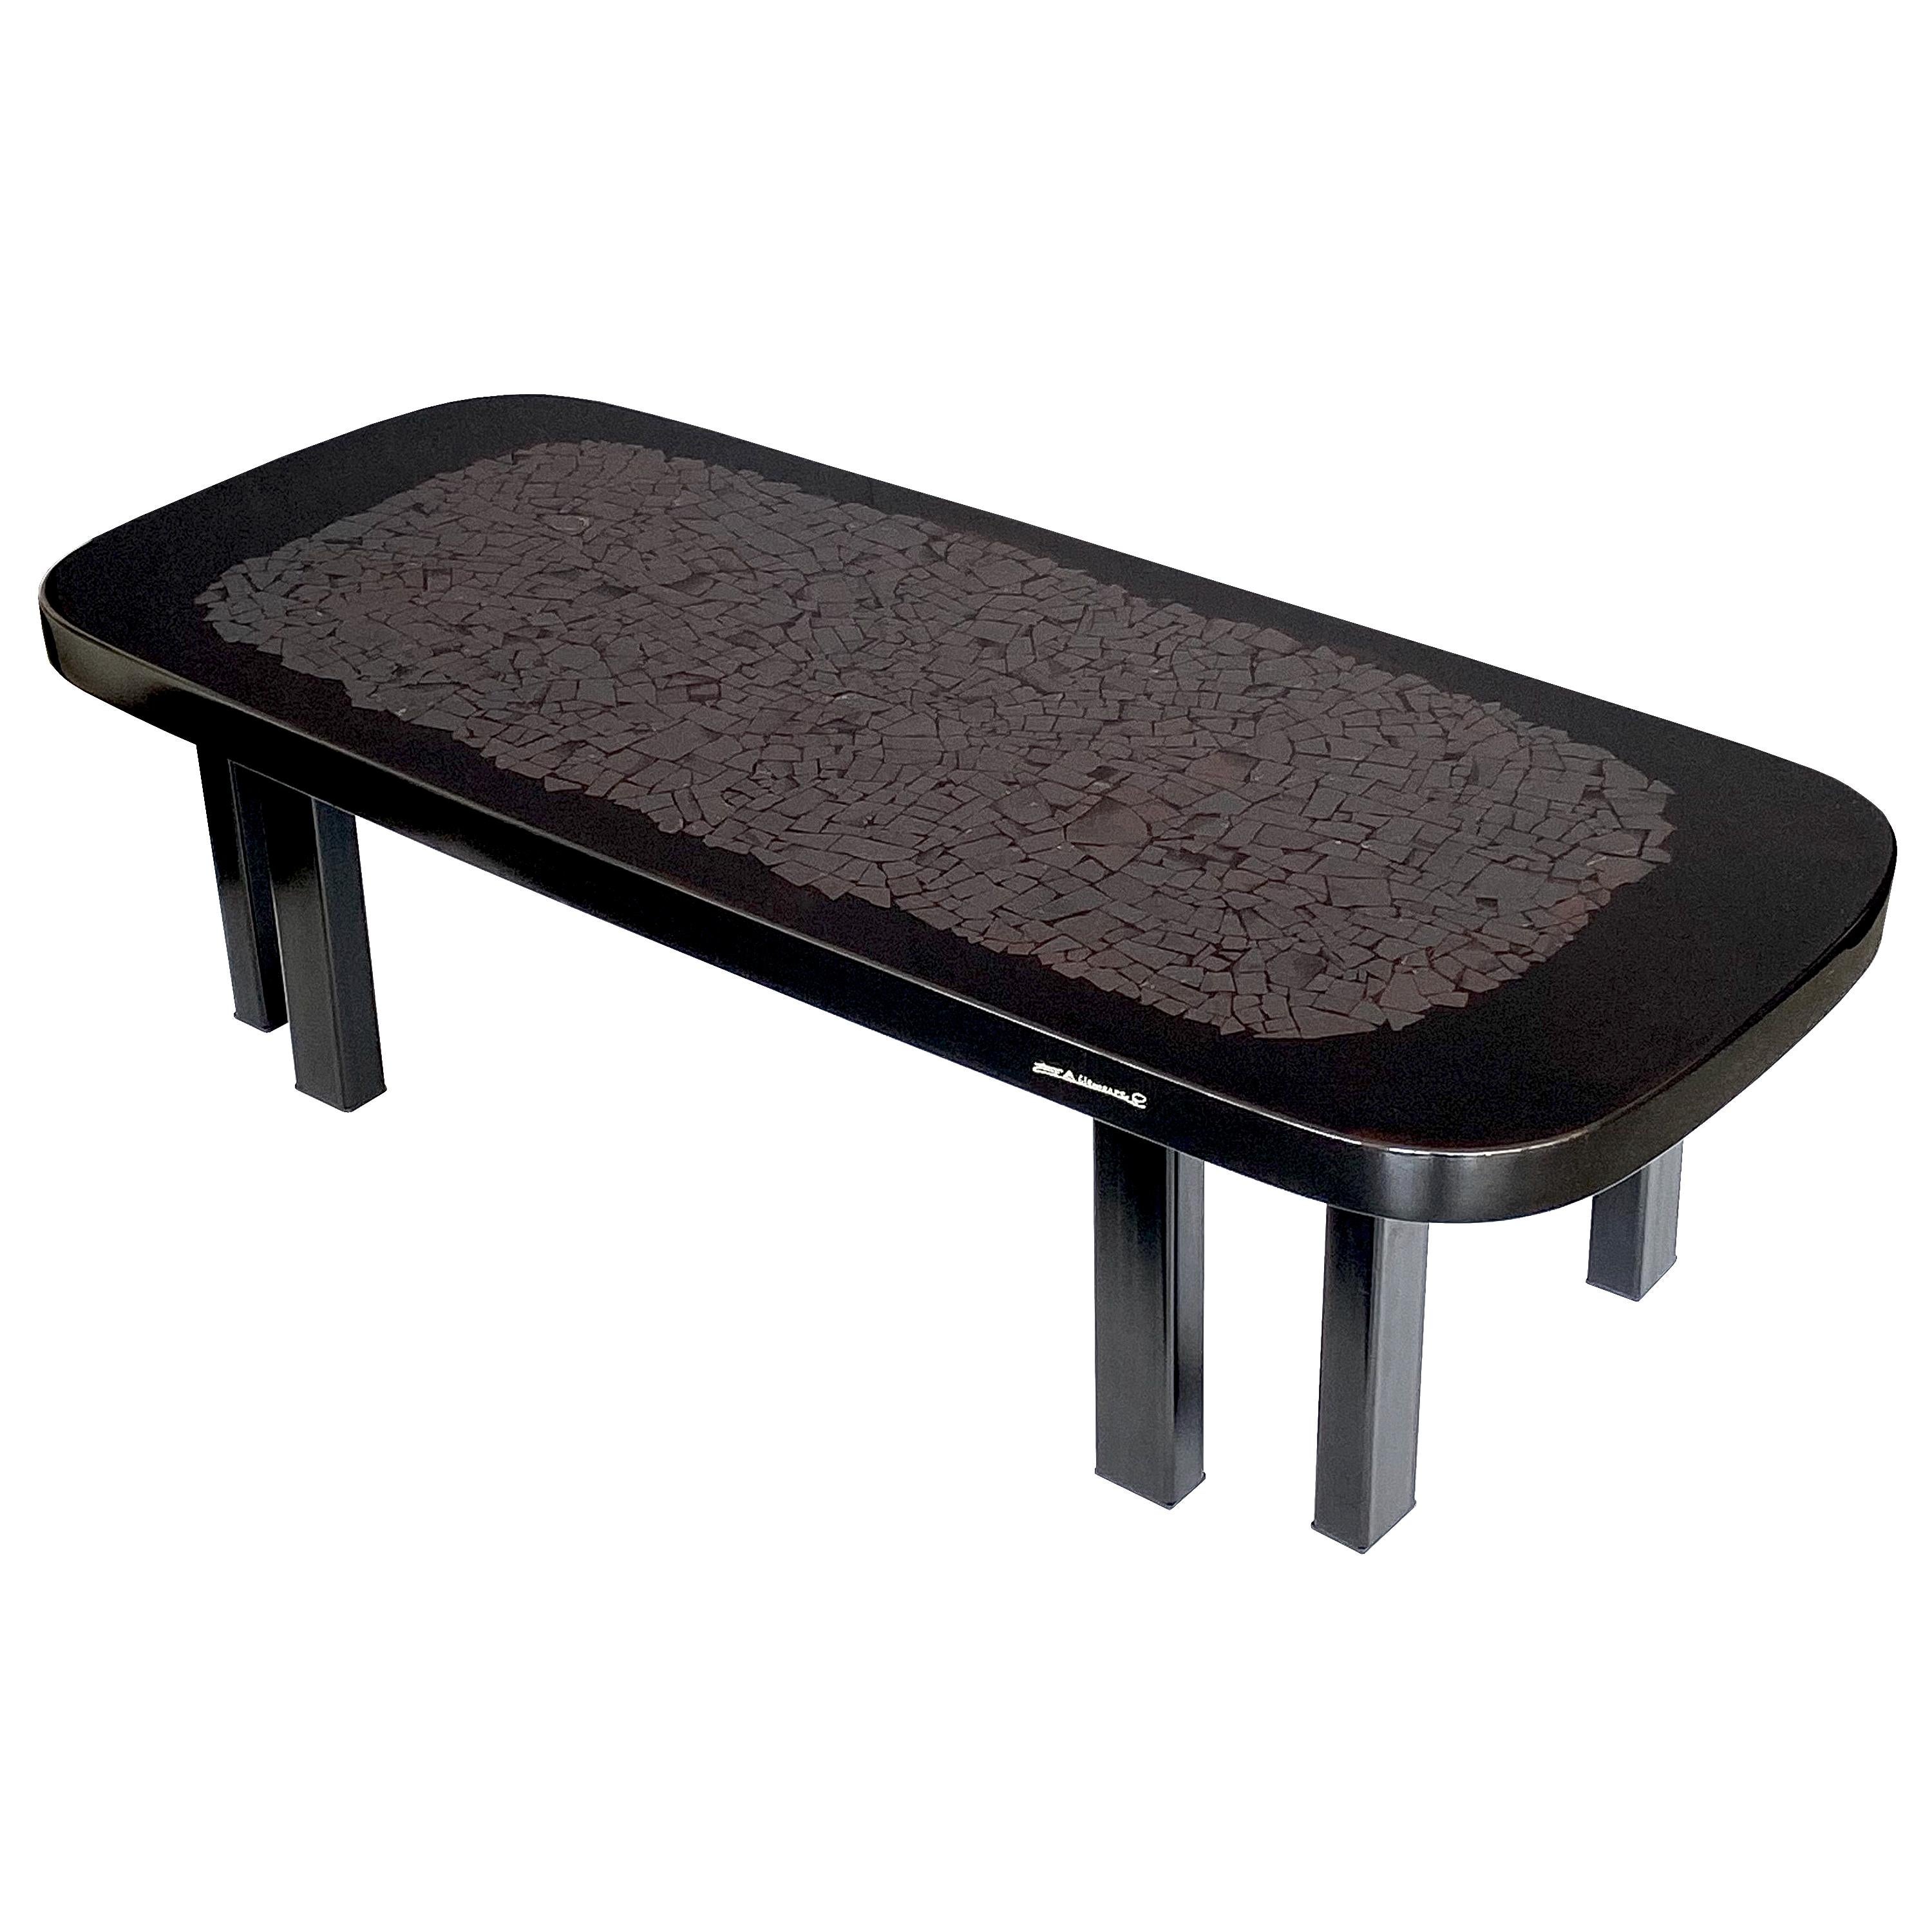 A rectangular coffee table with rounded corners by Etienne Allemeersch, circa 1970s, Belgium. This cocktail table is inlaid with a mosaic of sliced hematite stones. The stones are inlaid in black resin and the table top is highly polished. The